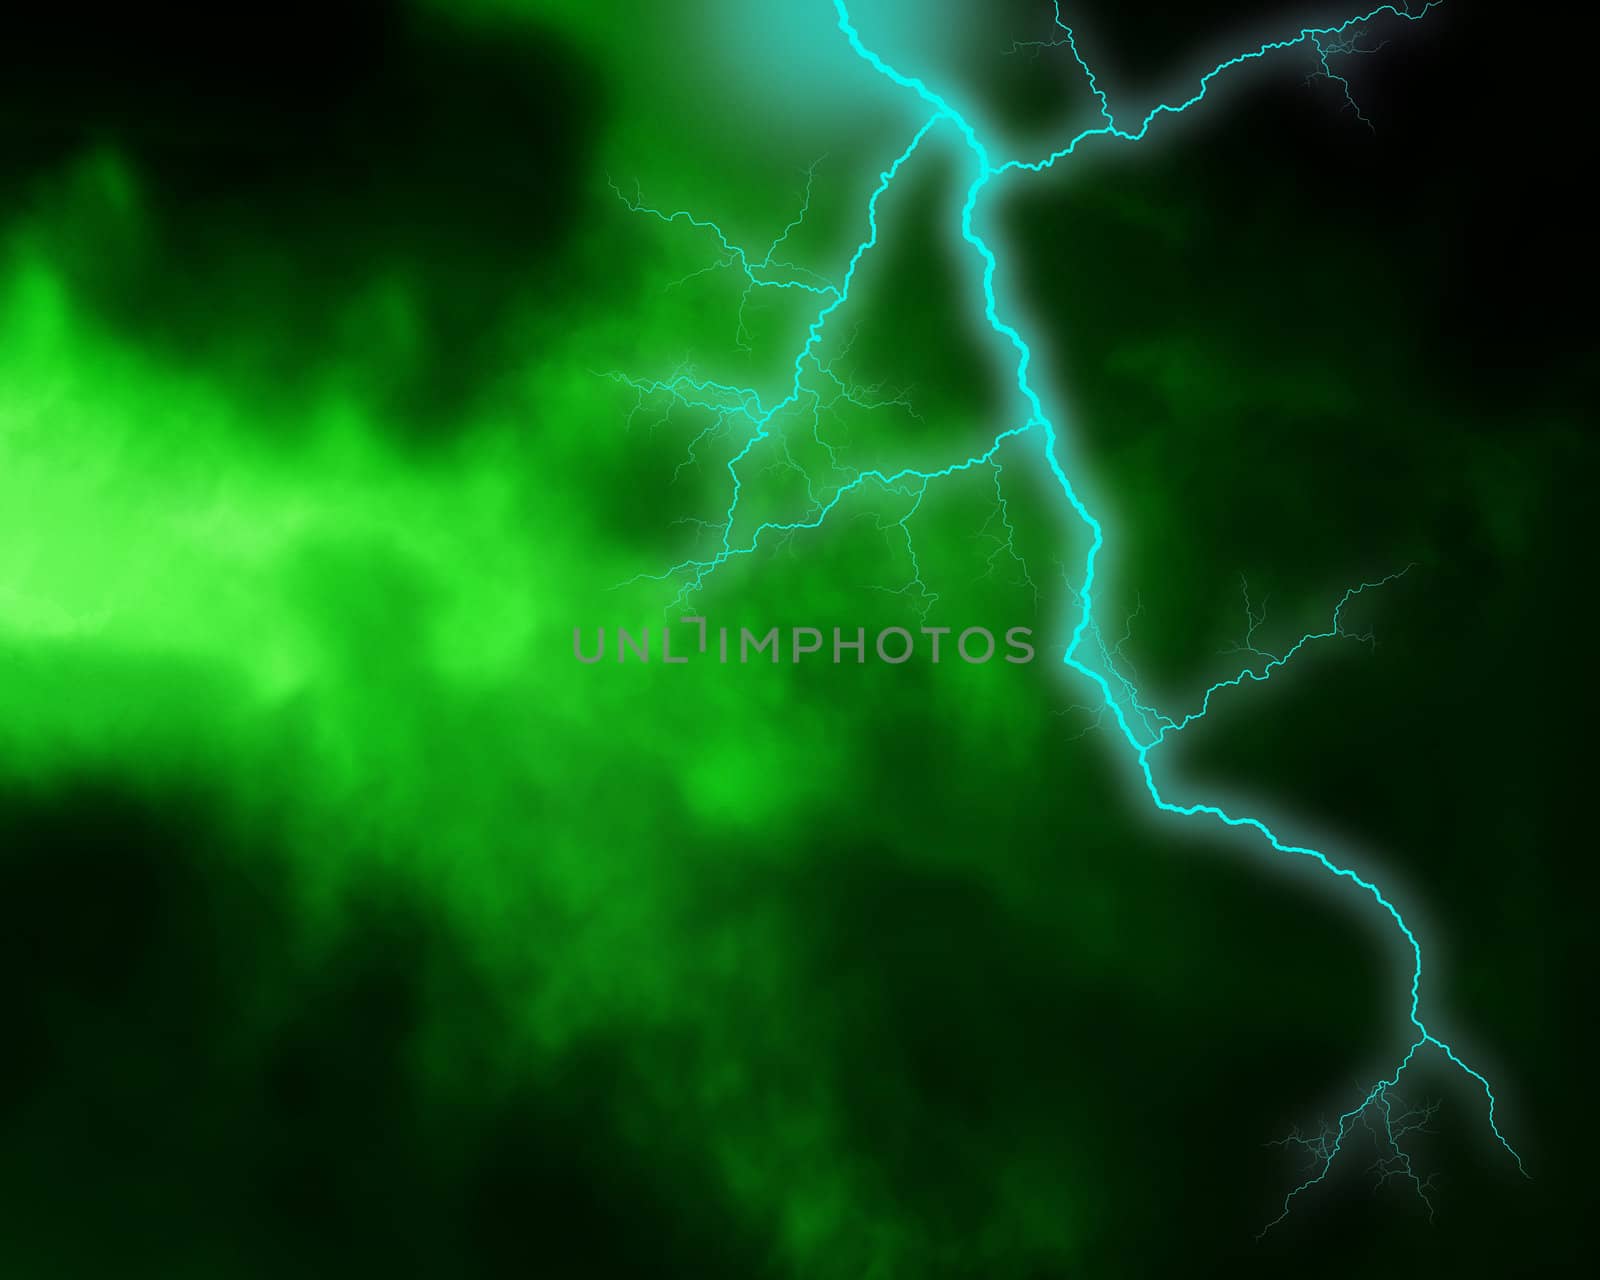 Lighting strike within some green clouds.